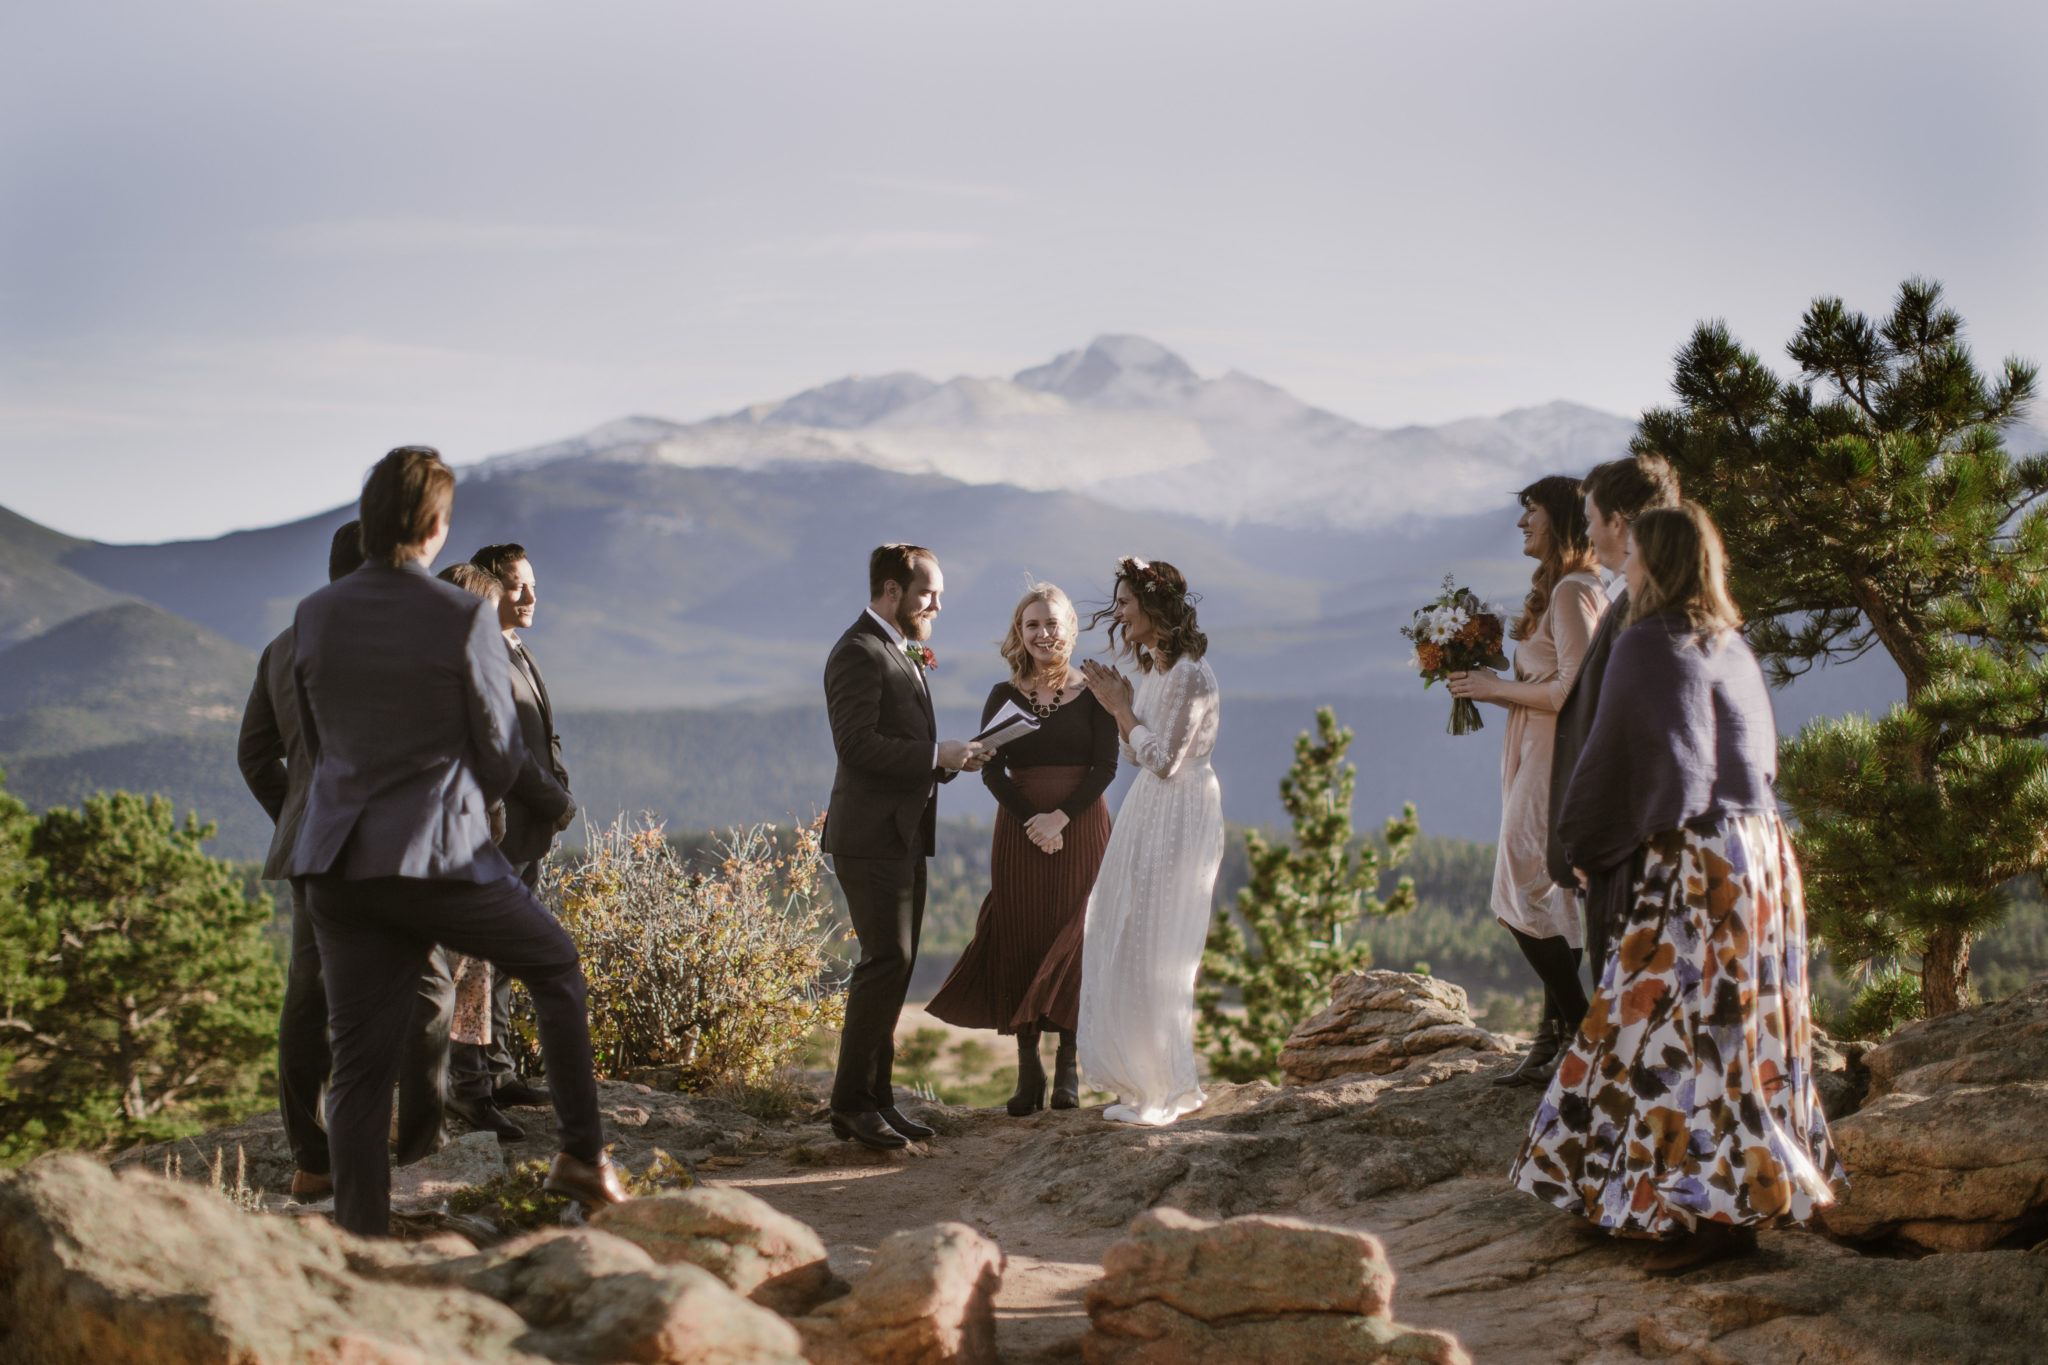 A couple in wedding clothes stands together near an officiant, being married on a mountain surrounded by a small group of people. Rocky Mountains form the backdrop in the distance.